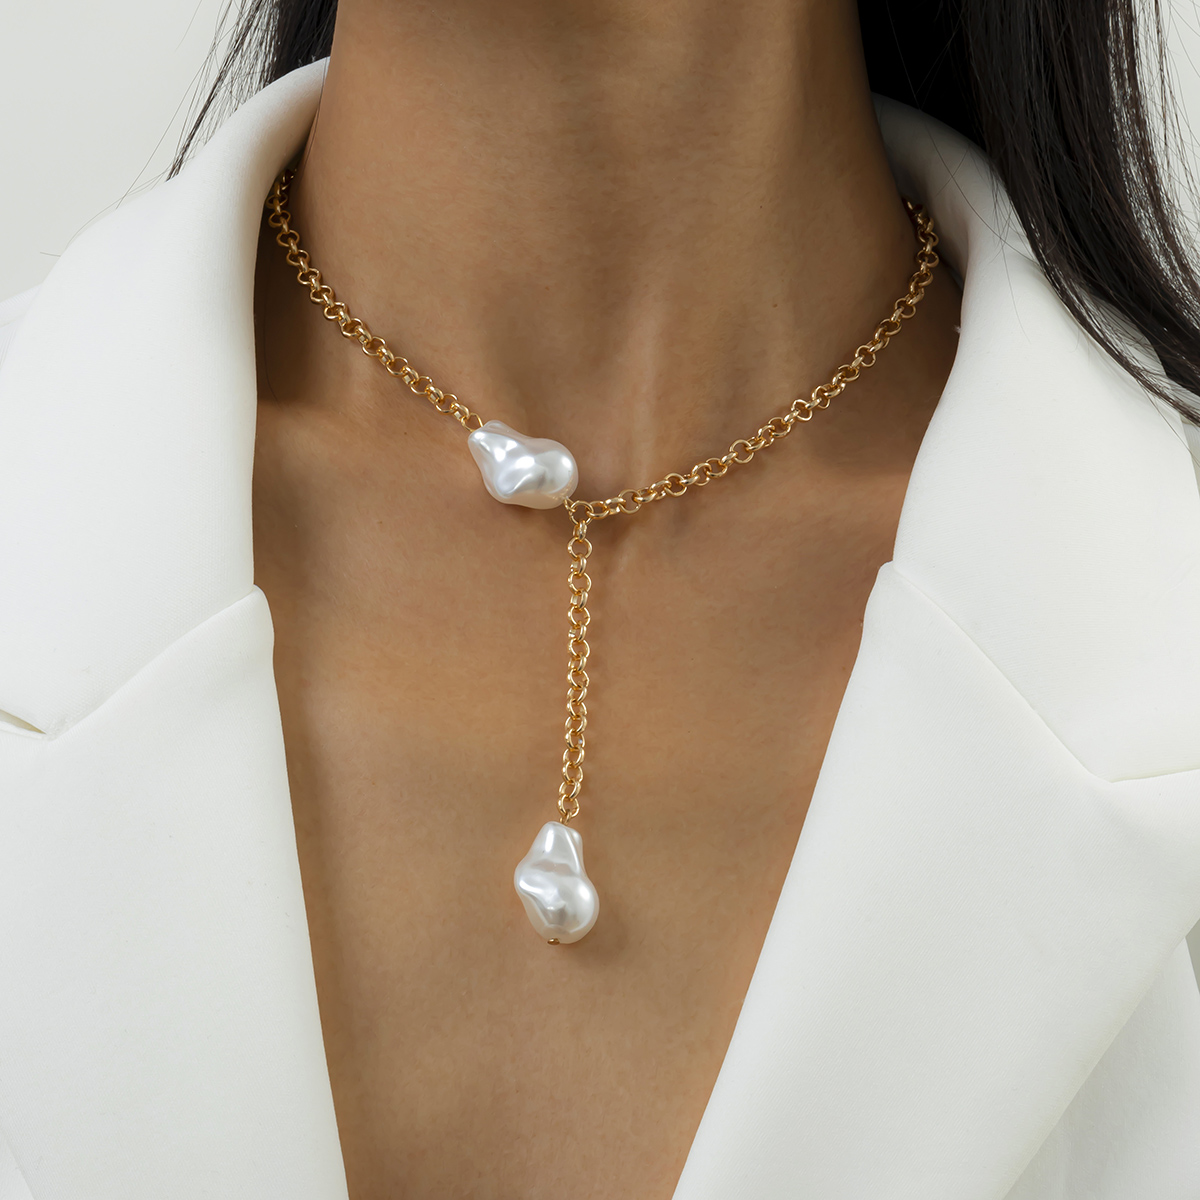 C03800 Baroque Irregular Shaped Faux Pearl Decor Pendant Necklace Vintage Link Chain Choker for Women